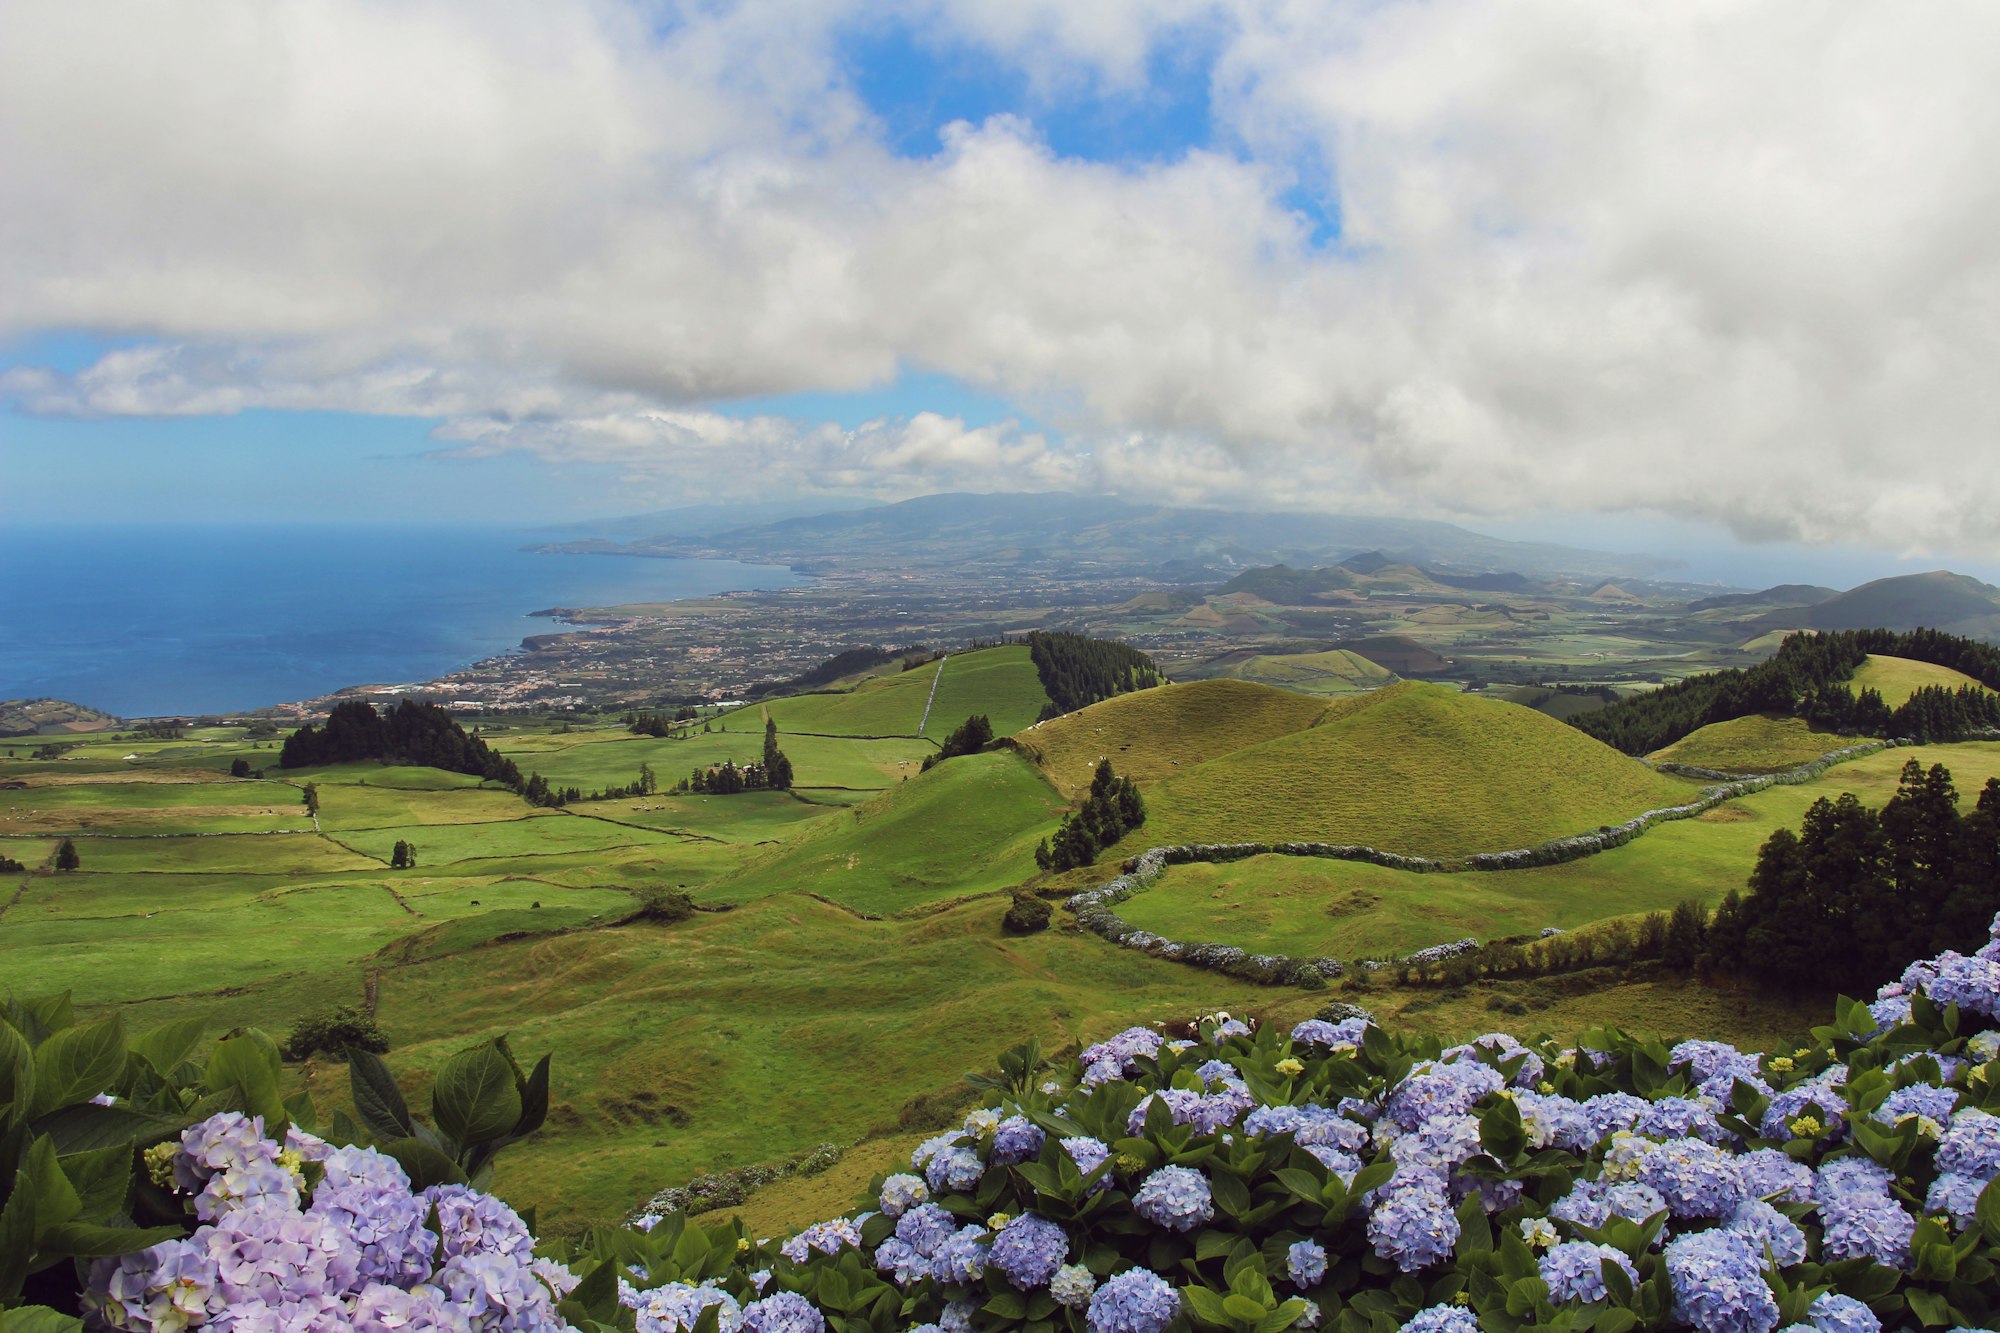 When is the best time to visit the Azores?